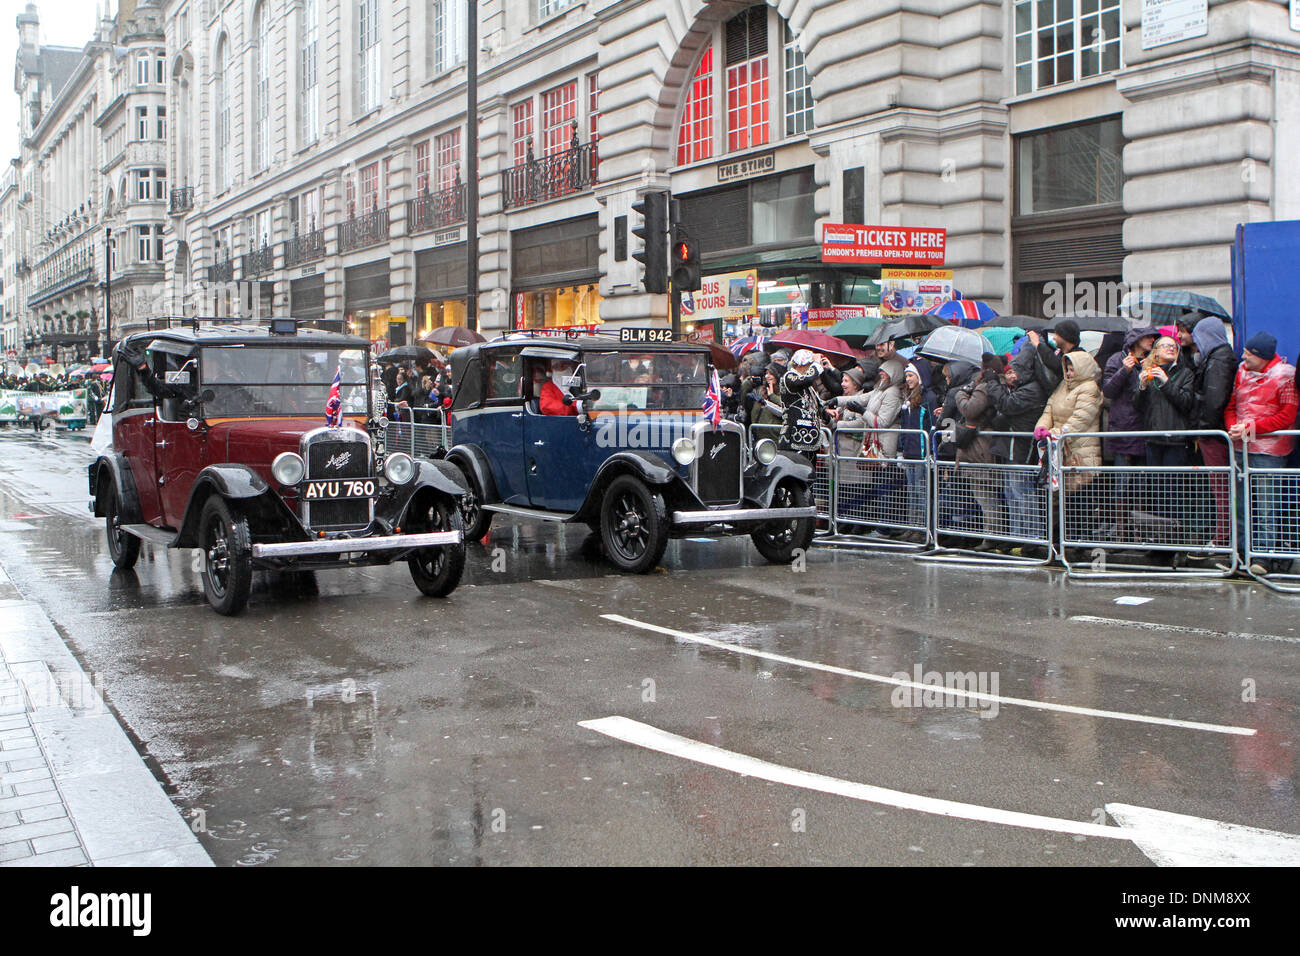 London,UK,1st January 2014,Vintage cars took part in the London's New Year's Day Parade 2014 Credit: Keith Larby/Alamy Live News Stock Photo